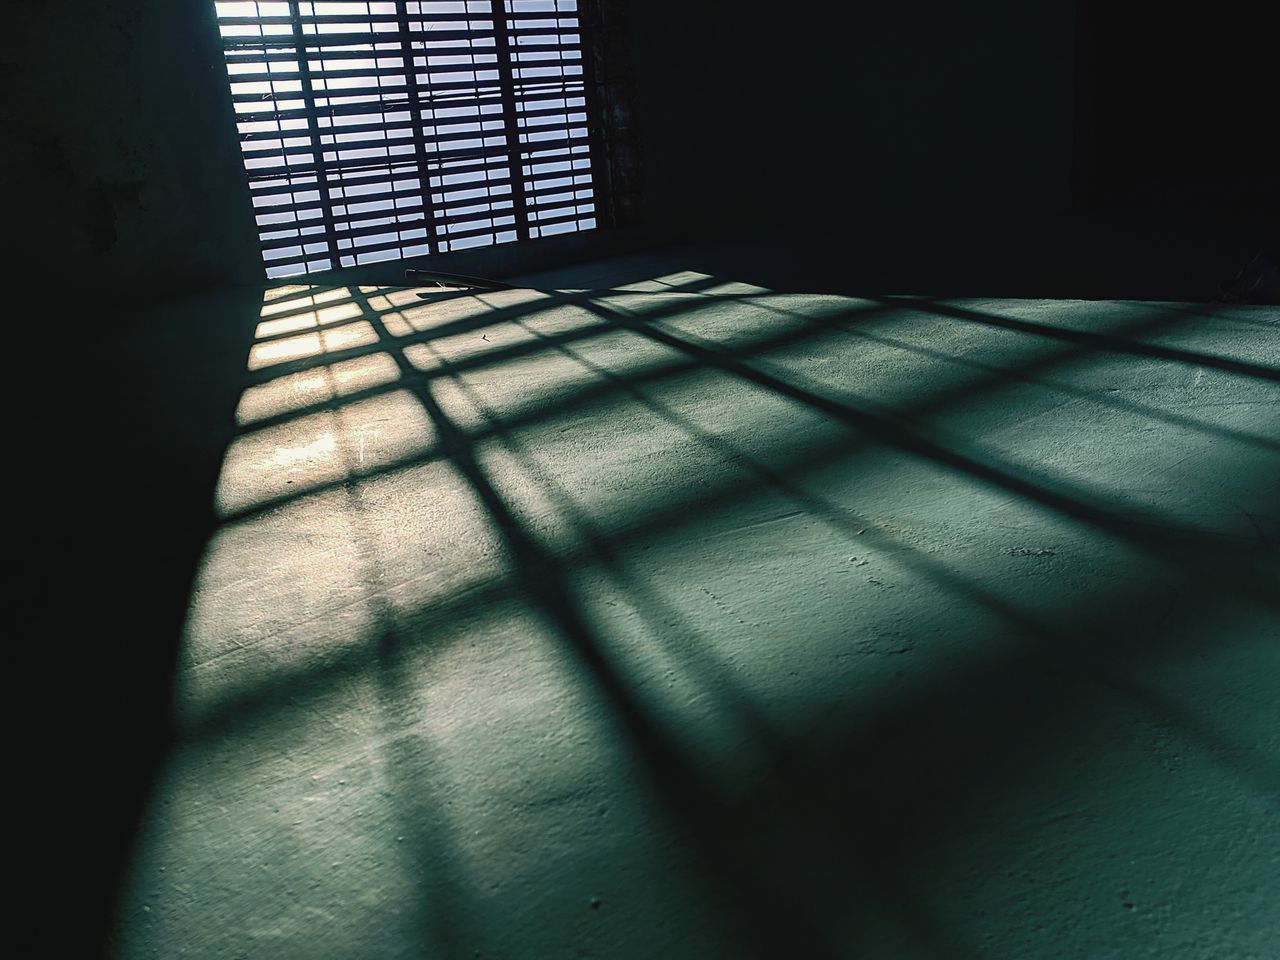 HIGH ANGLE VIEW OF SUNLIGHT FALLING ON FLOOR IN WINDOW